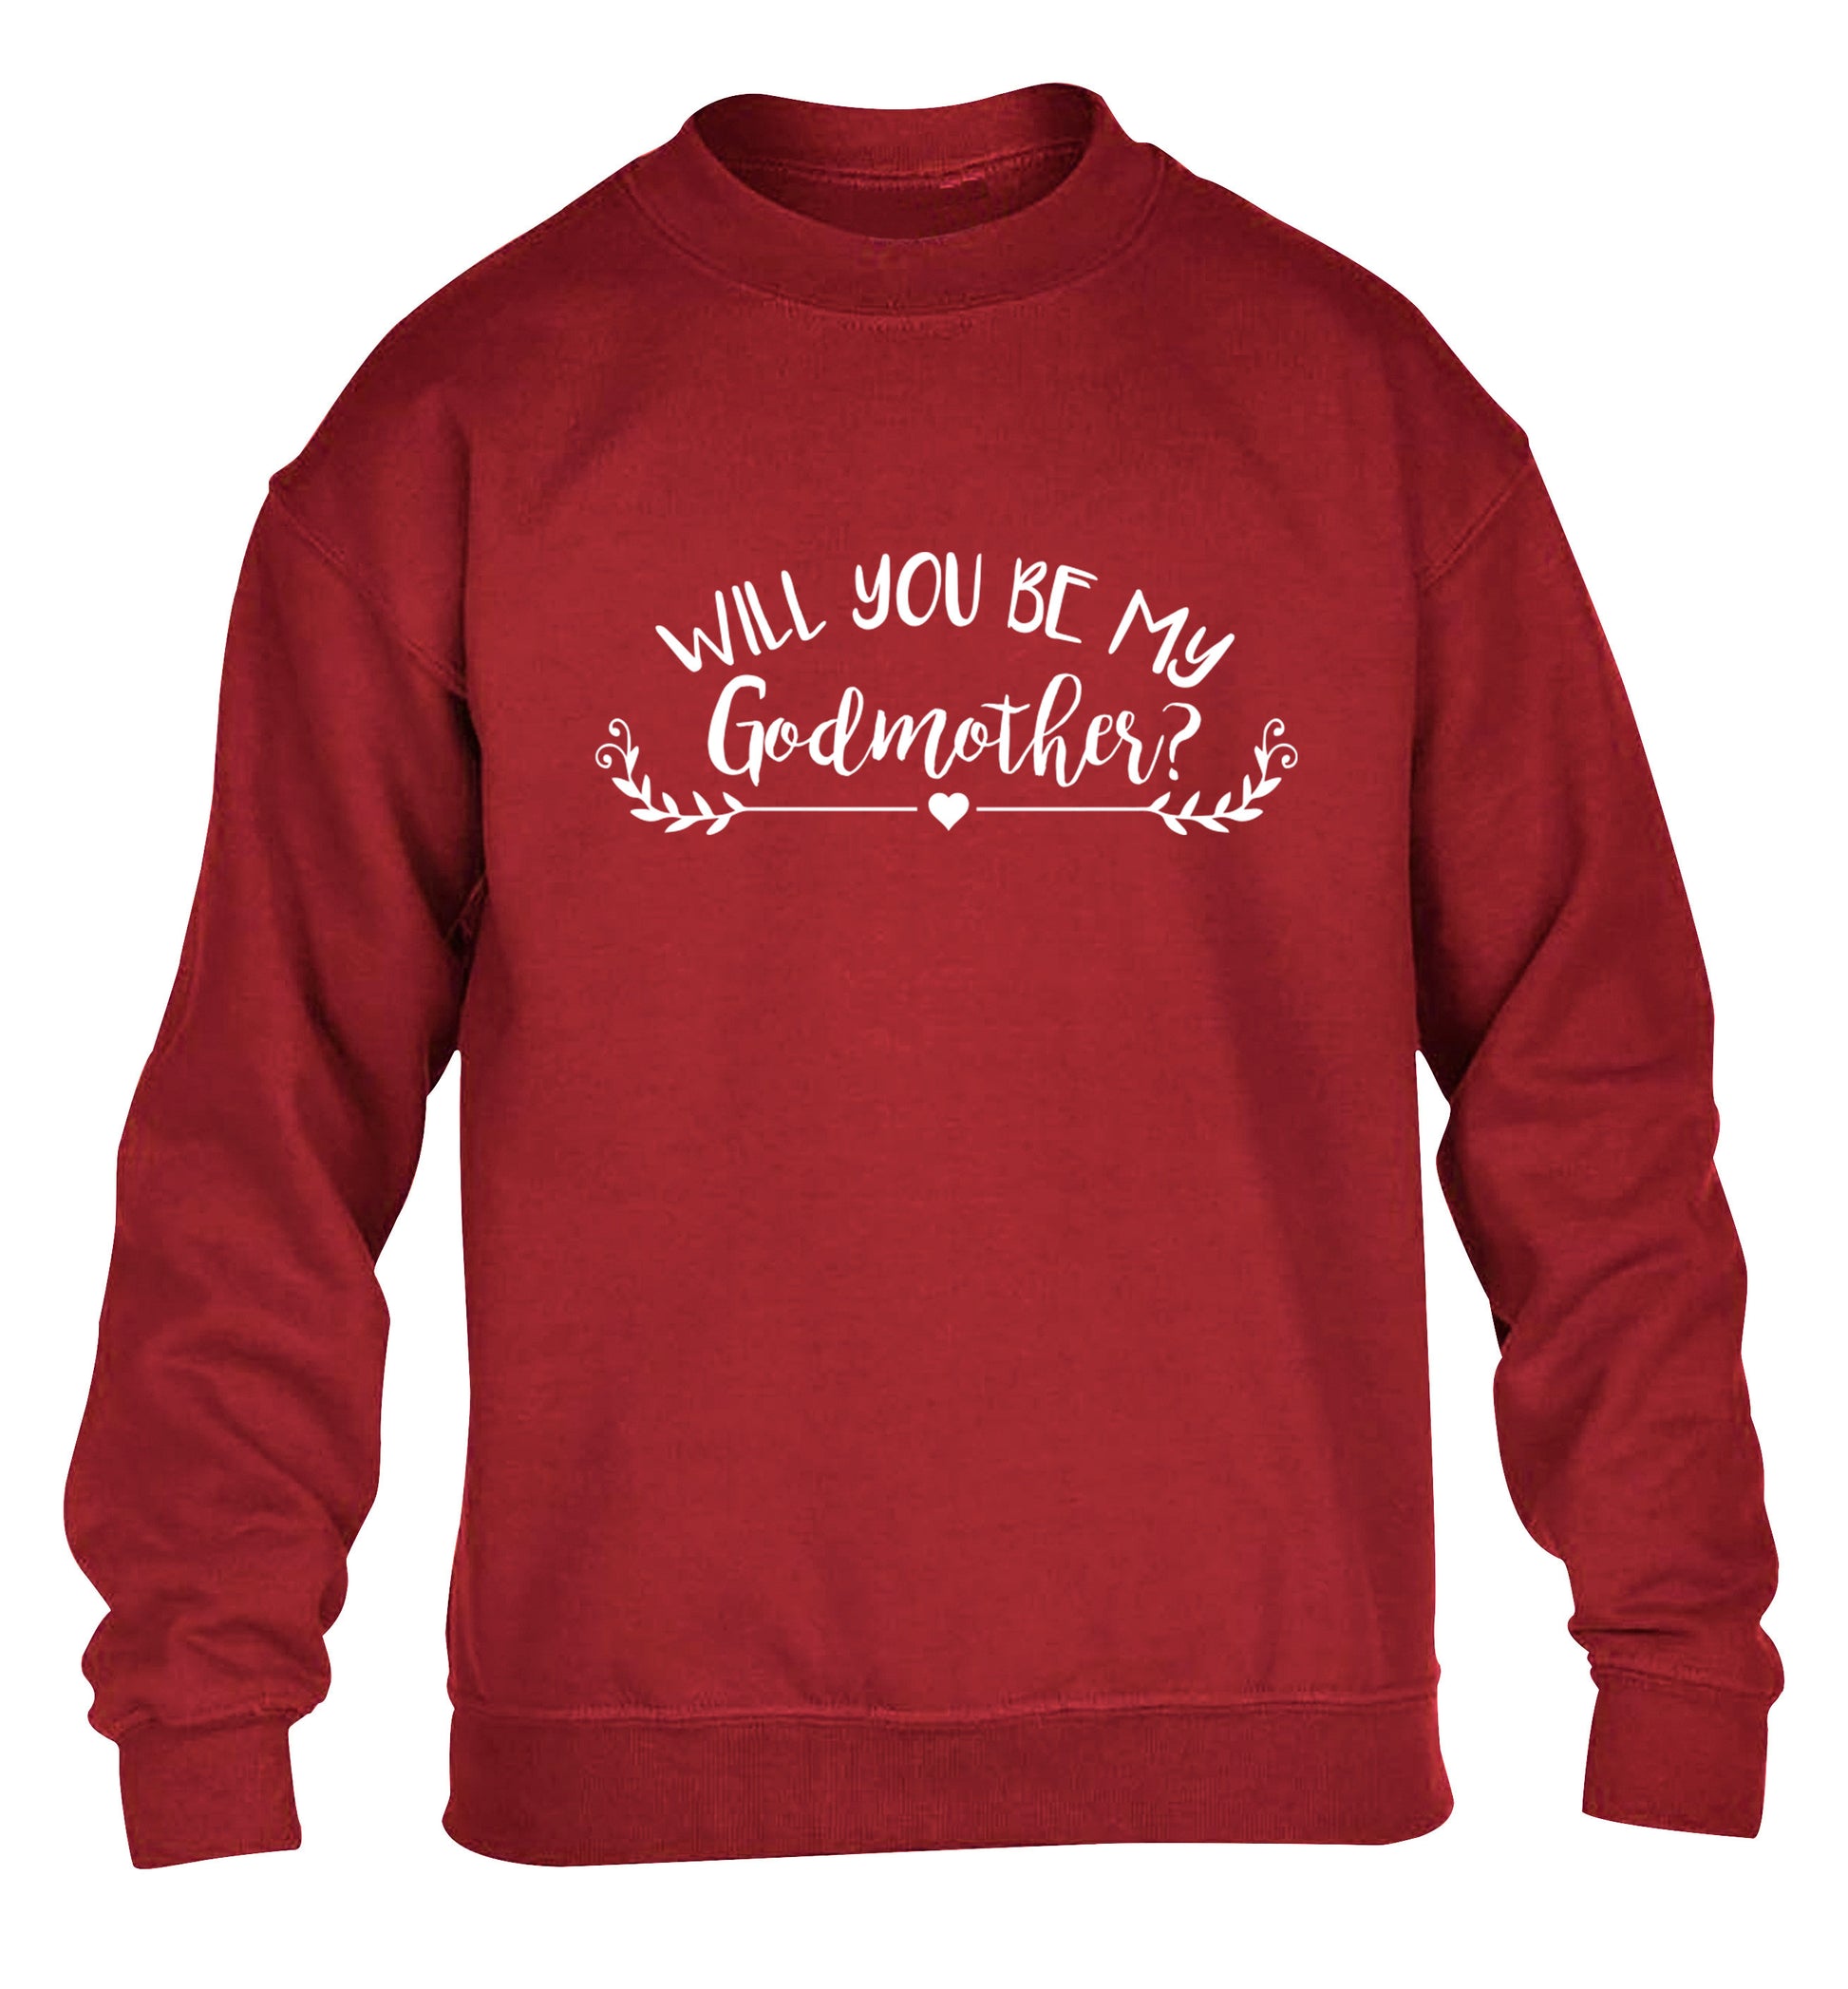 Will you be my godmother? children's grey sweater 12-14 Years